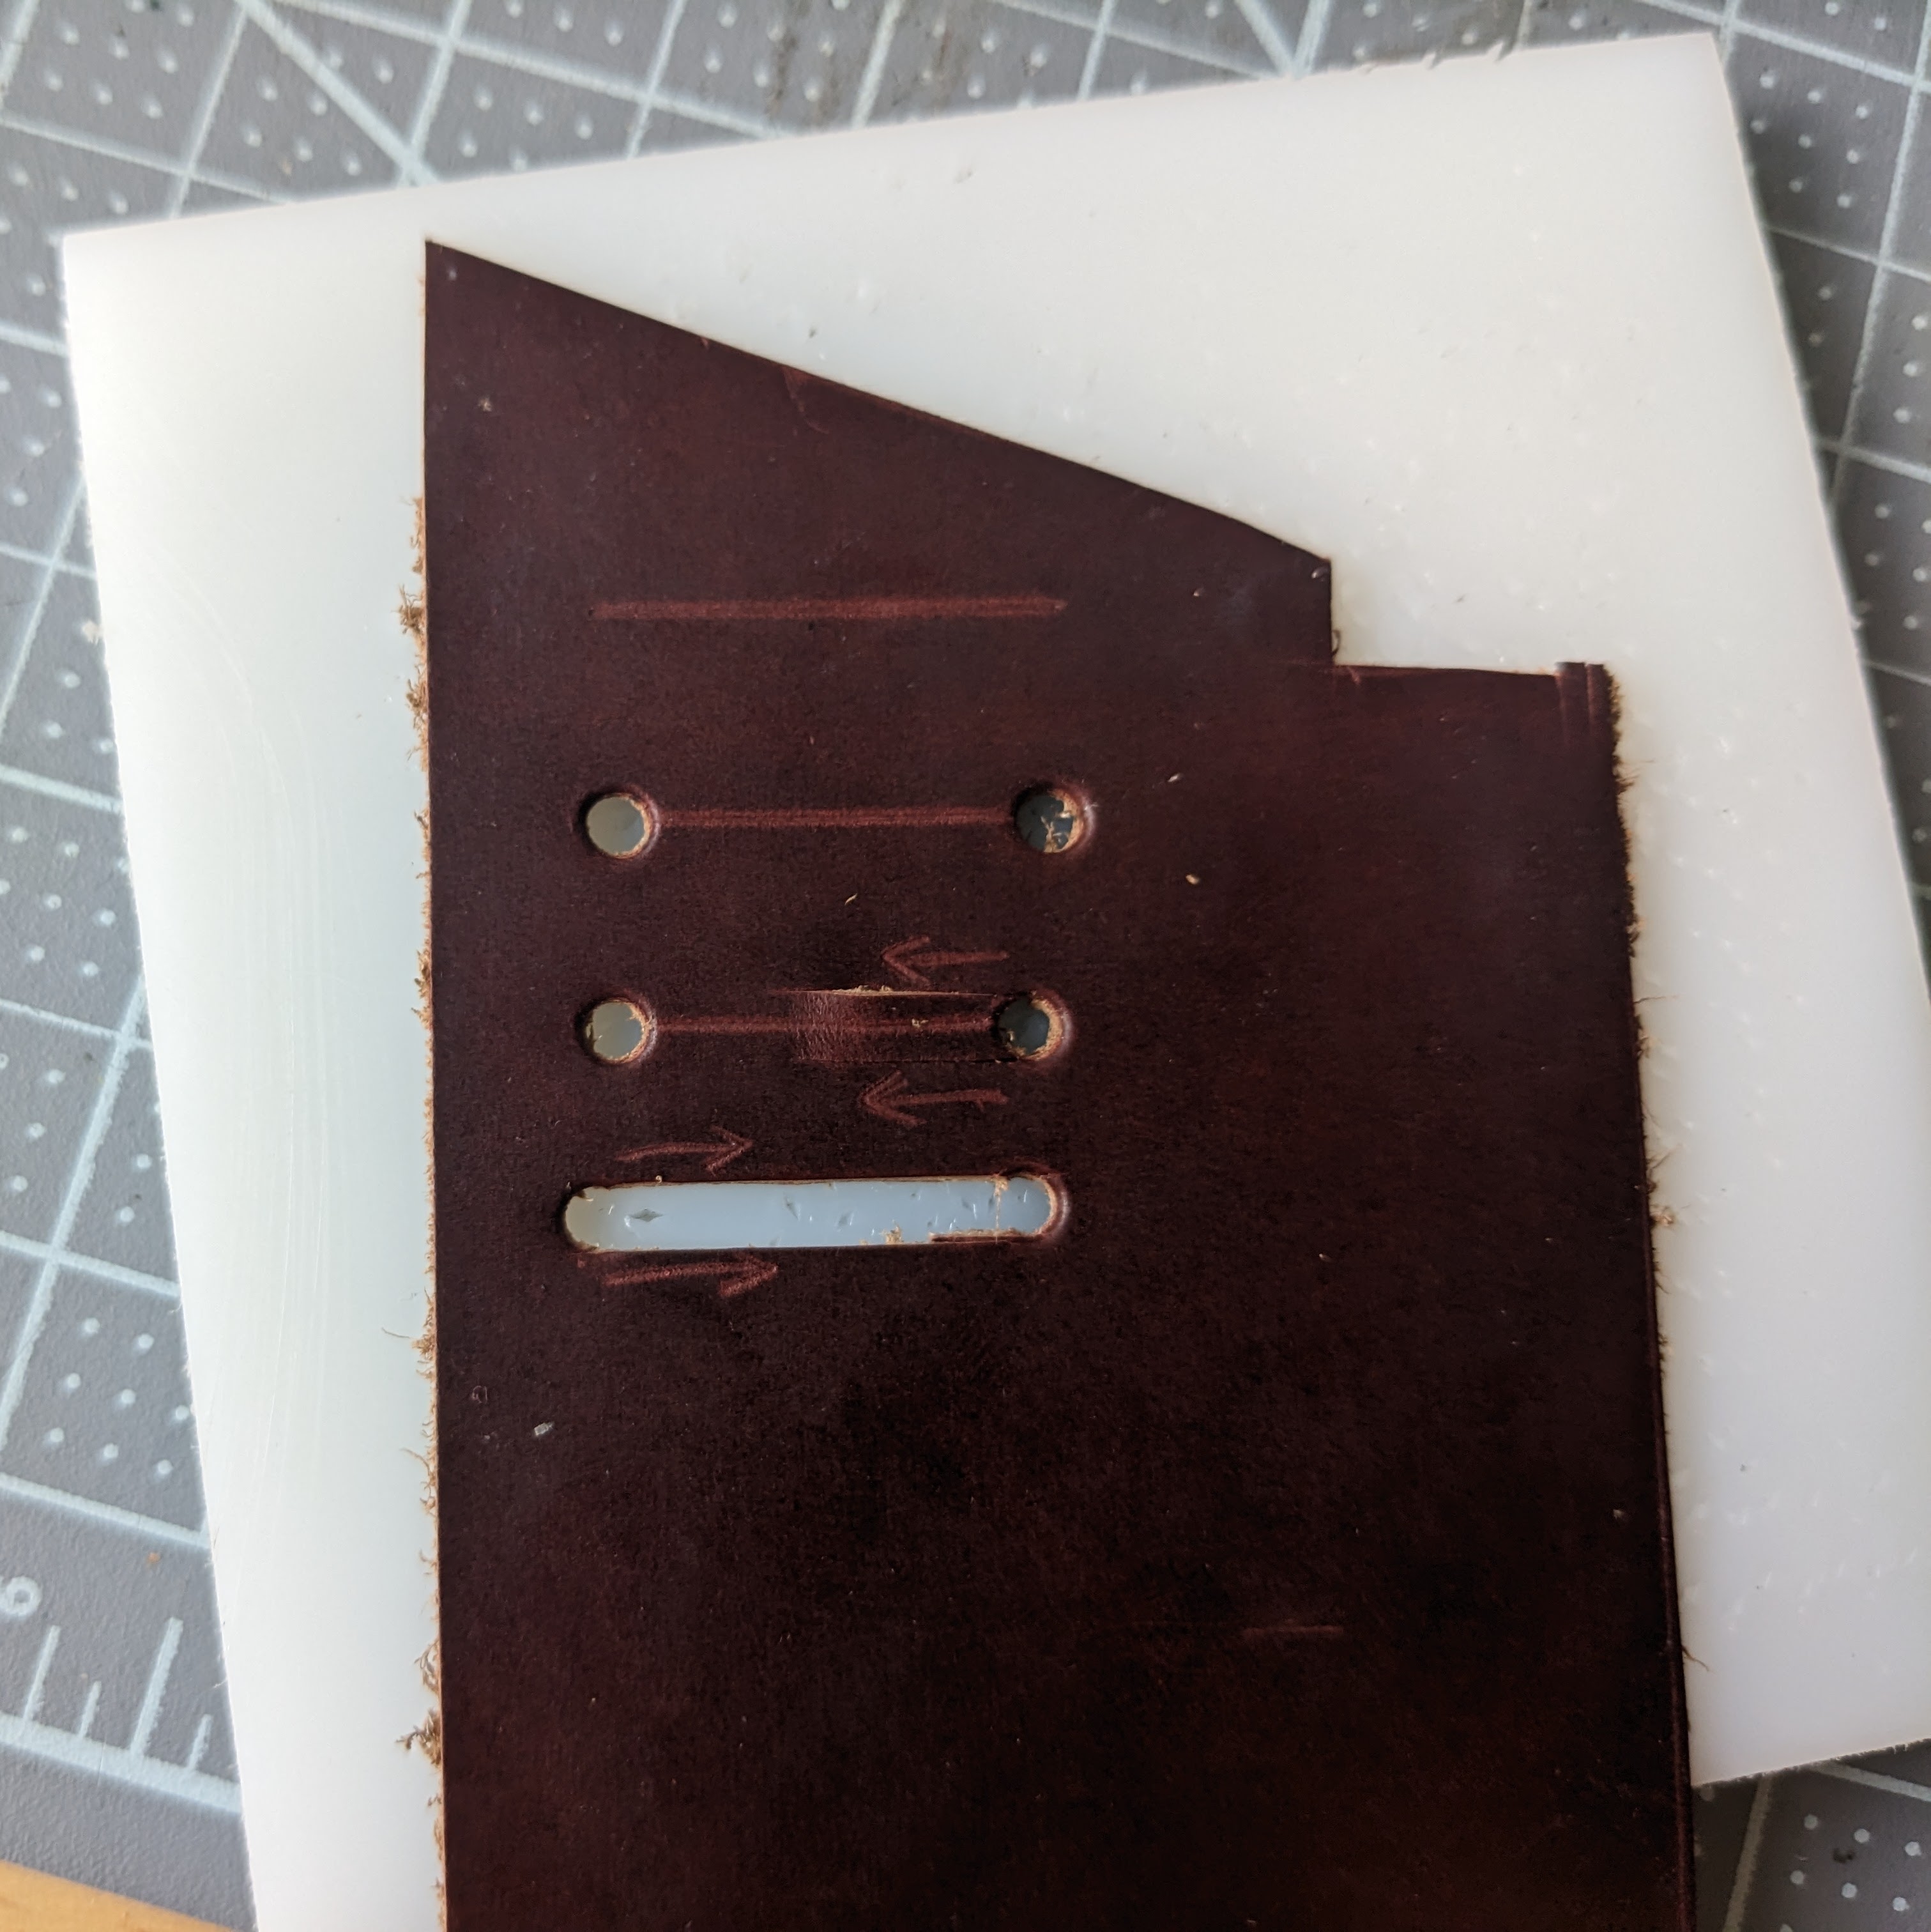 A small piece of leather showing the steps to creating an oblong hole. First there is just a straight 1-inch line drawn by scratch awl. Holes are punched at both ends of that line. Two cuts are made coming from the right-side hole inwards (shown by arrows), about halfway. Similar cuts are then made from the left-hand hole inwards to meet them.